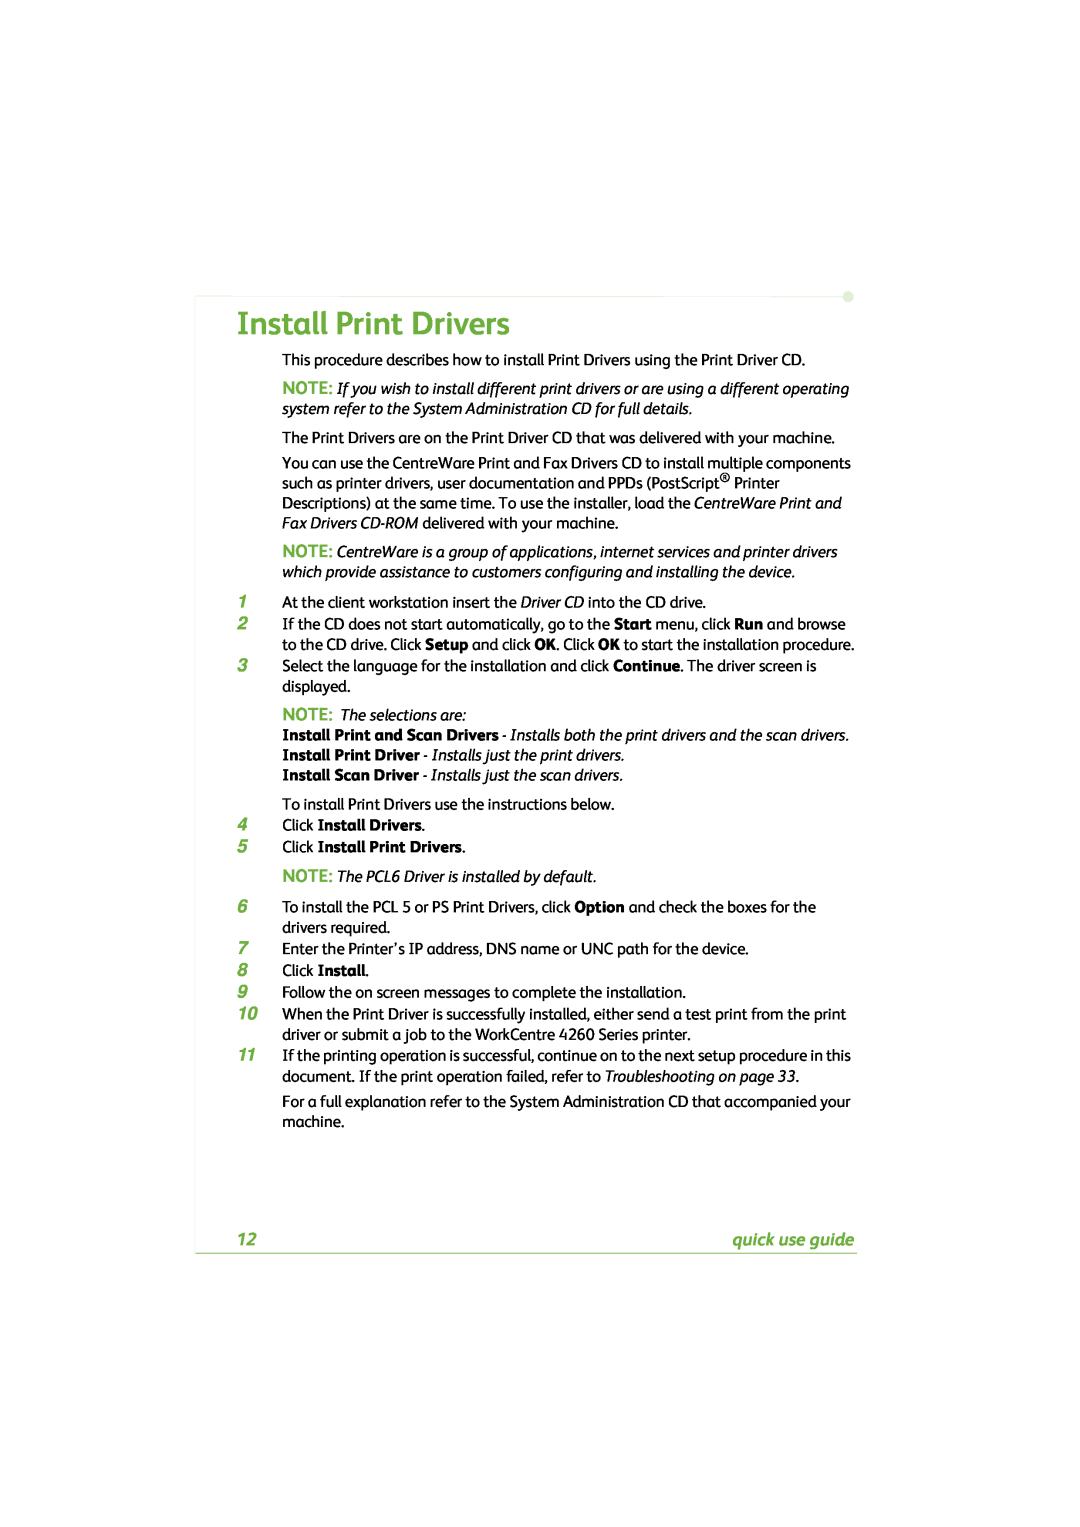 Xerox 4260C manual Install Print Drivers, NOTE: The selections are, NOTE: The PCL6 Driver is installed by default 